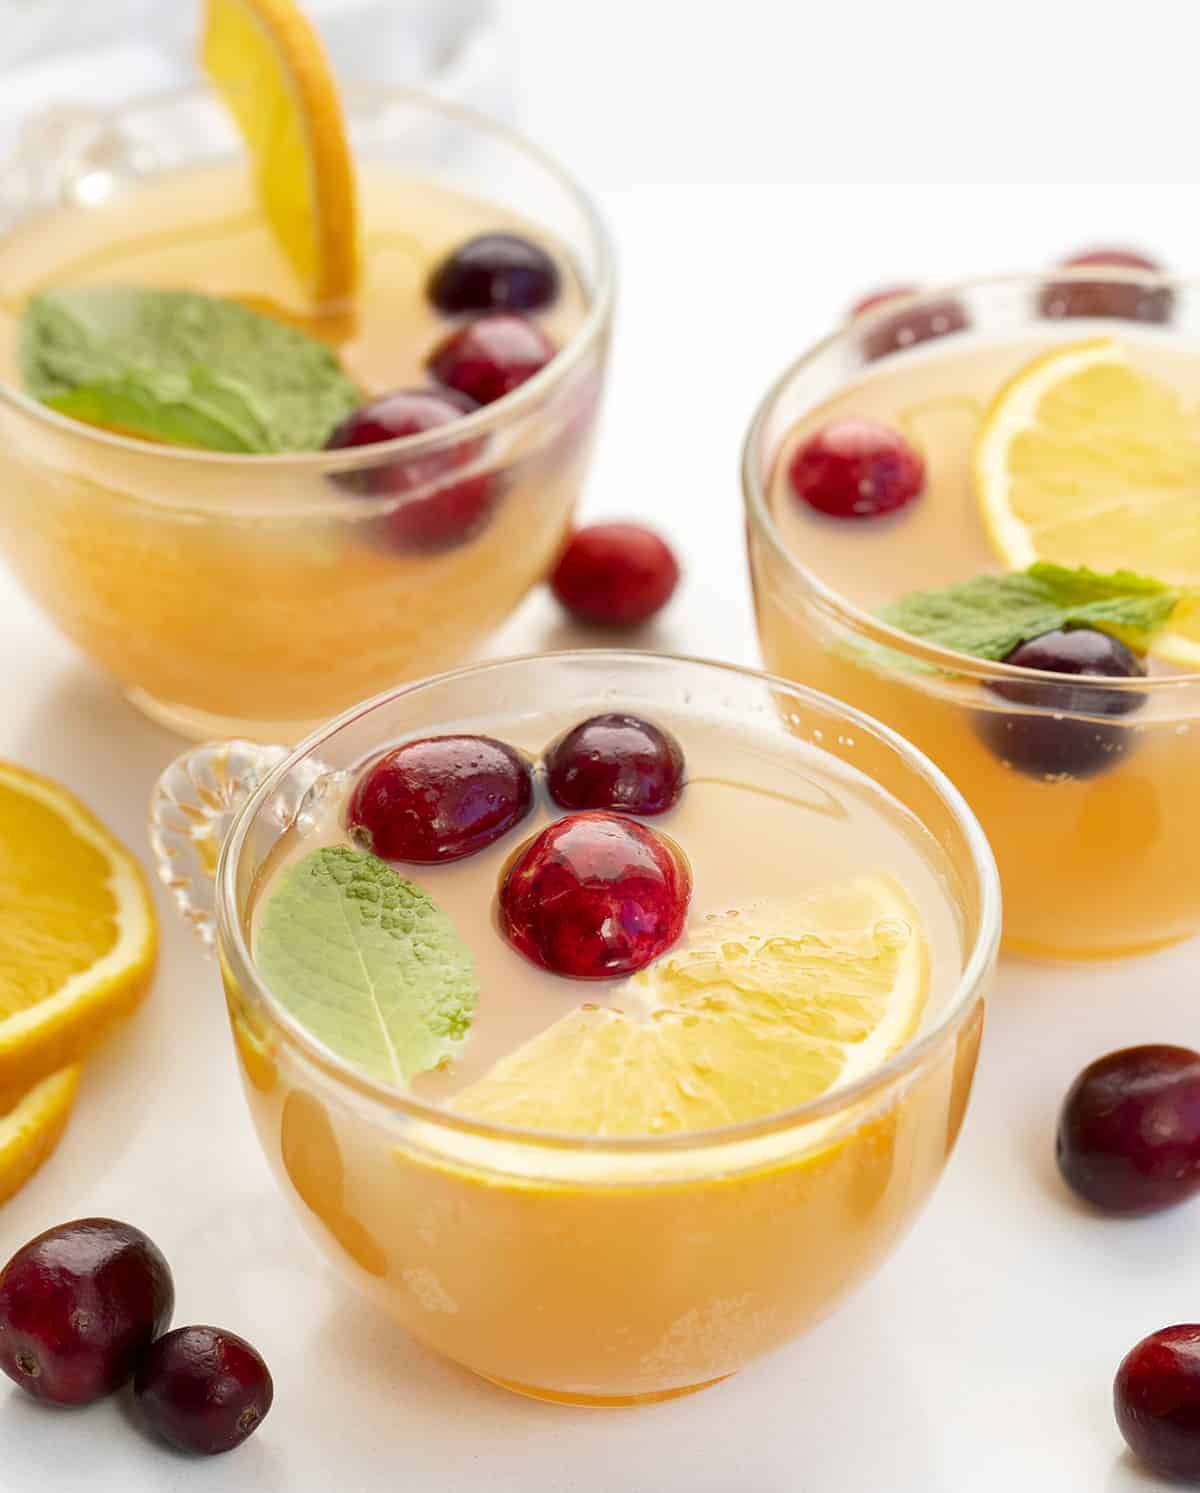 Cups of Christmas Punch